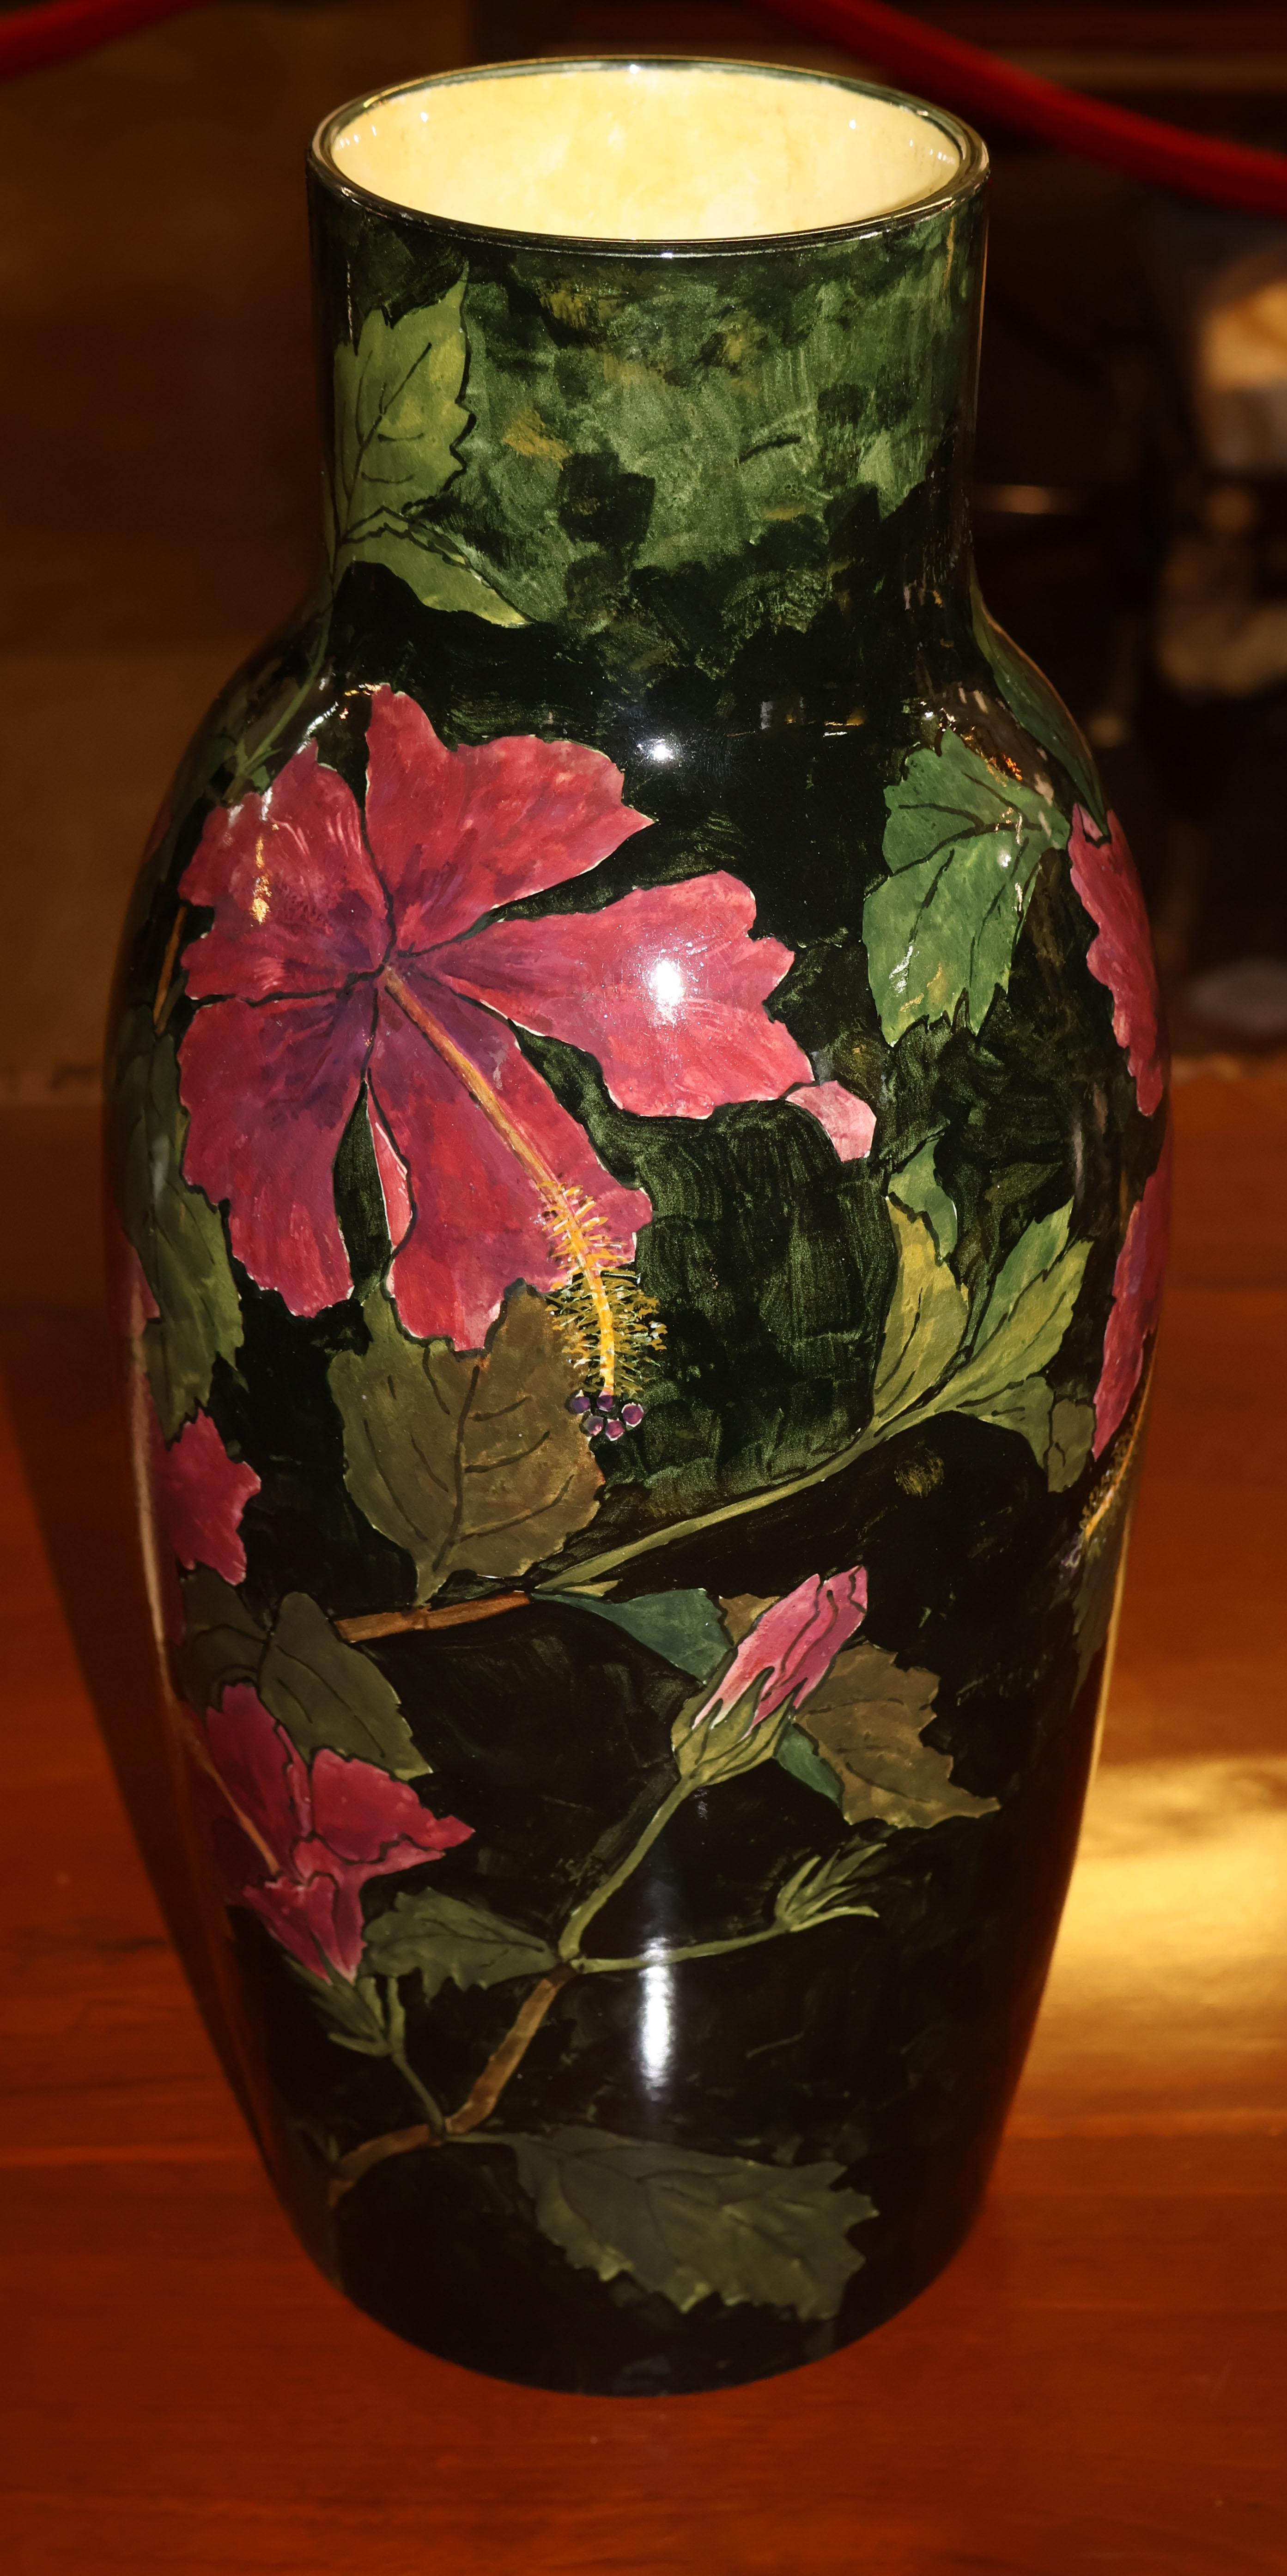 ​Large John Bennet Hibiscus Painted and Glazed Earthenware Vase Circa 1880

Dimensions : 15.5